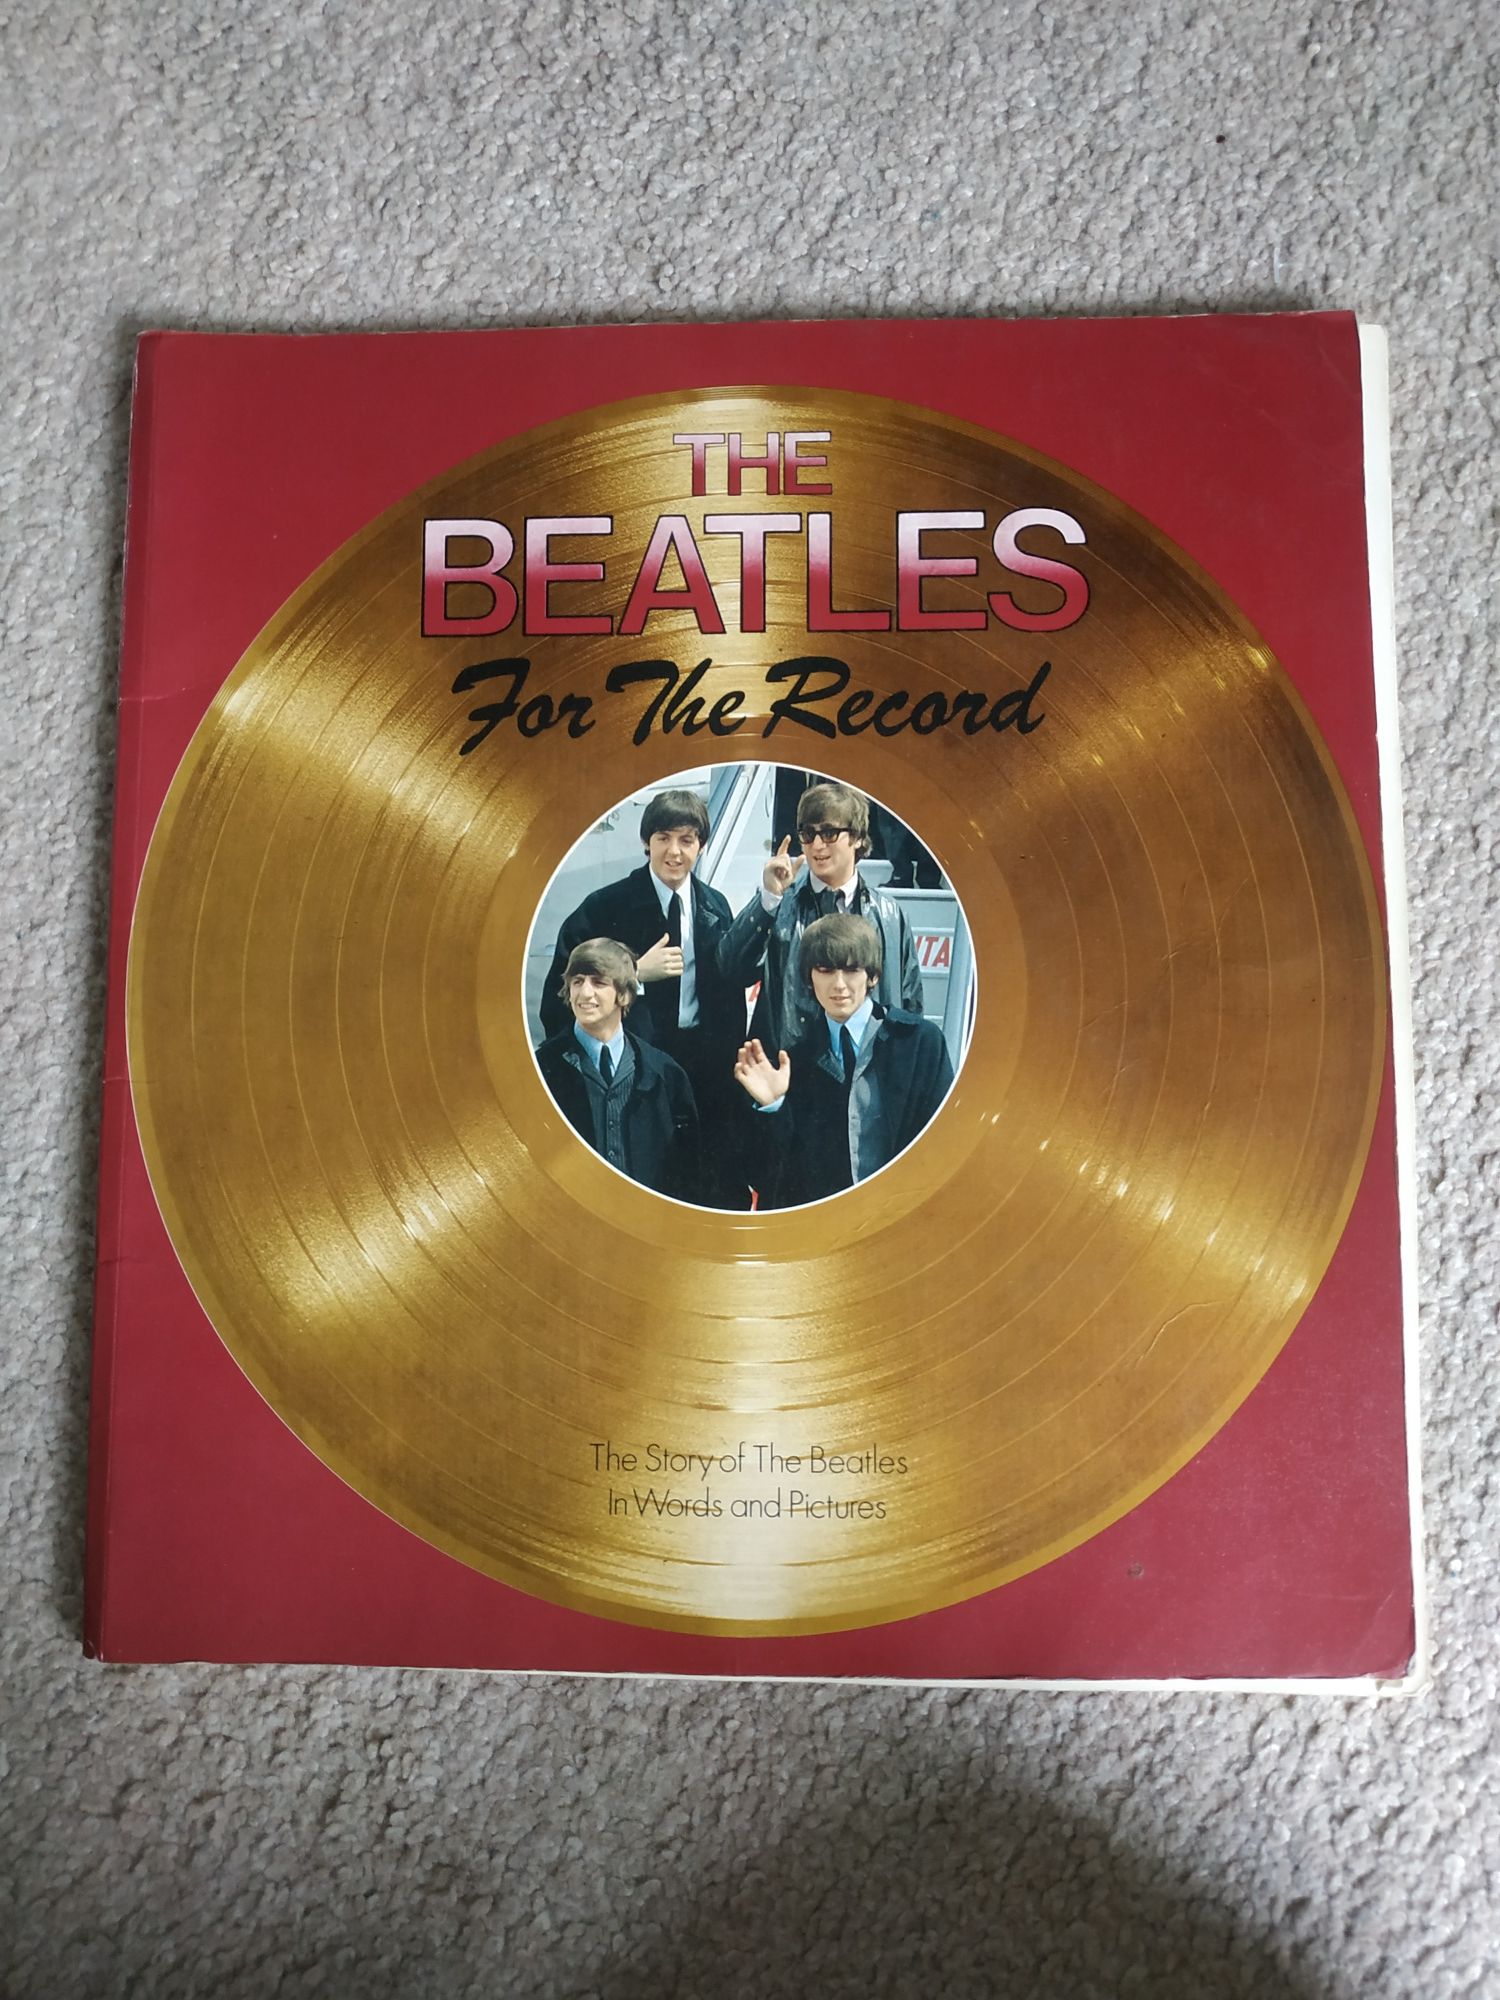 The Beatles for the Record